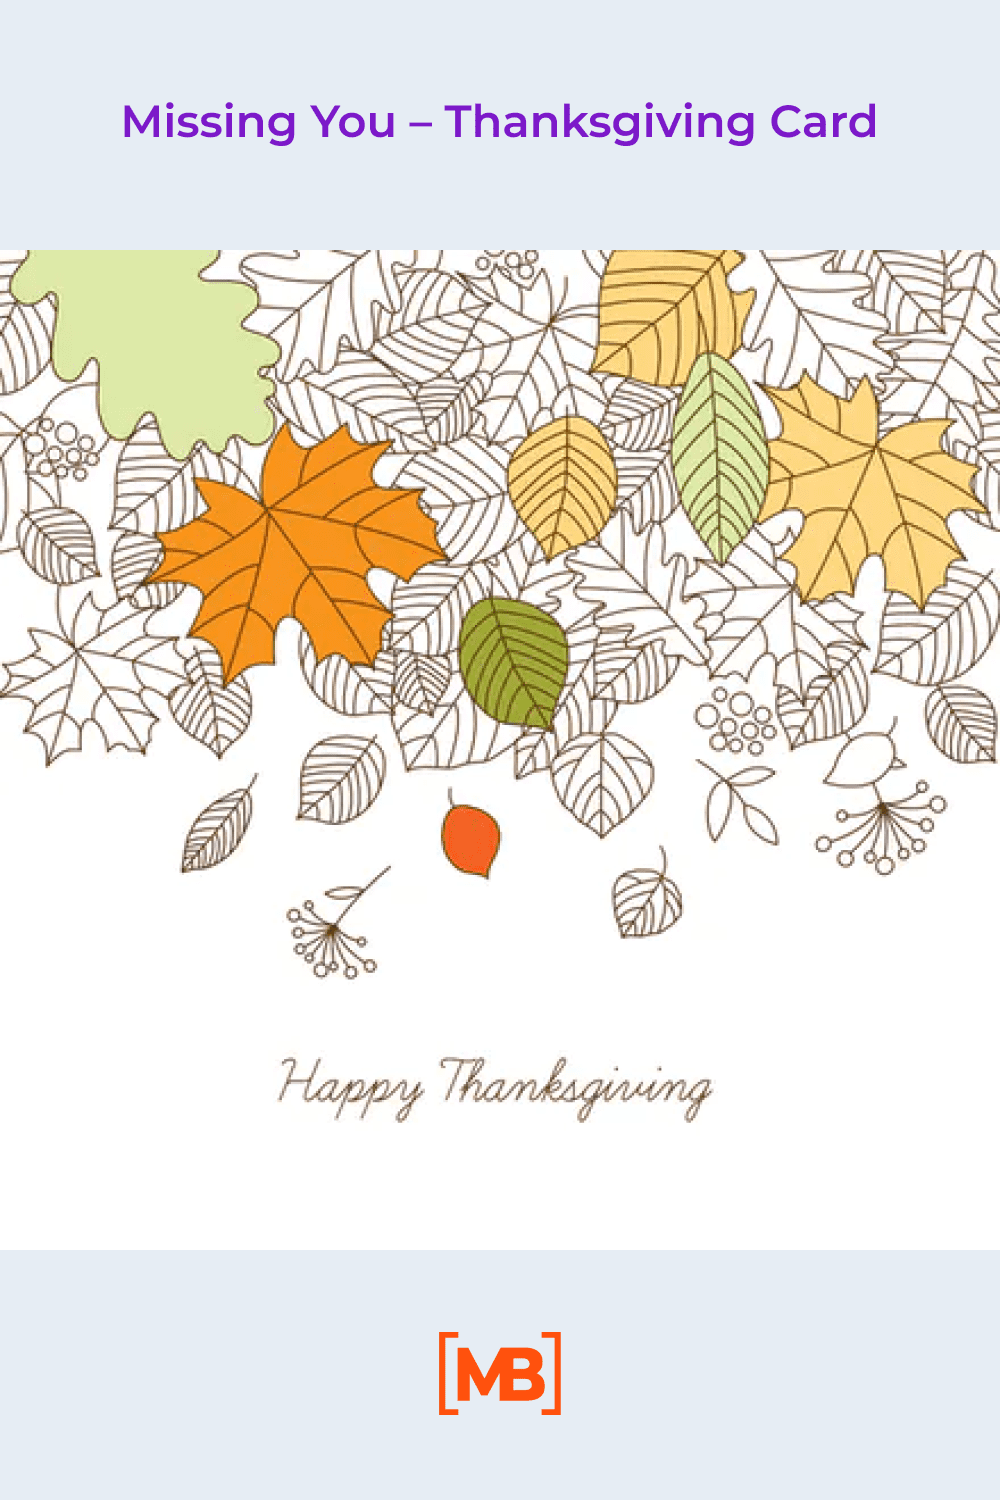 Missing you - Thanksgiving card.